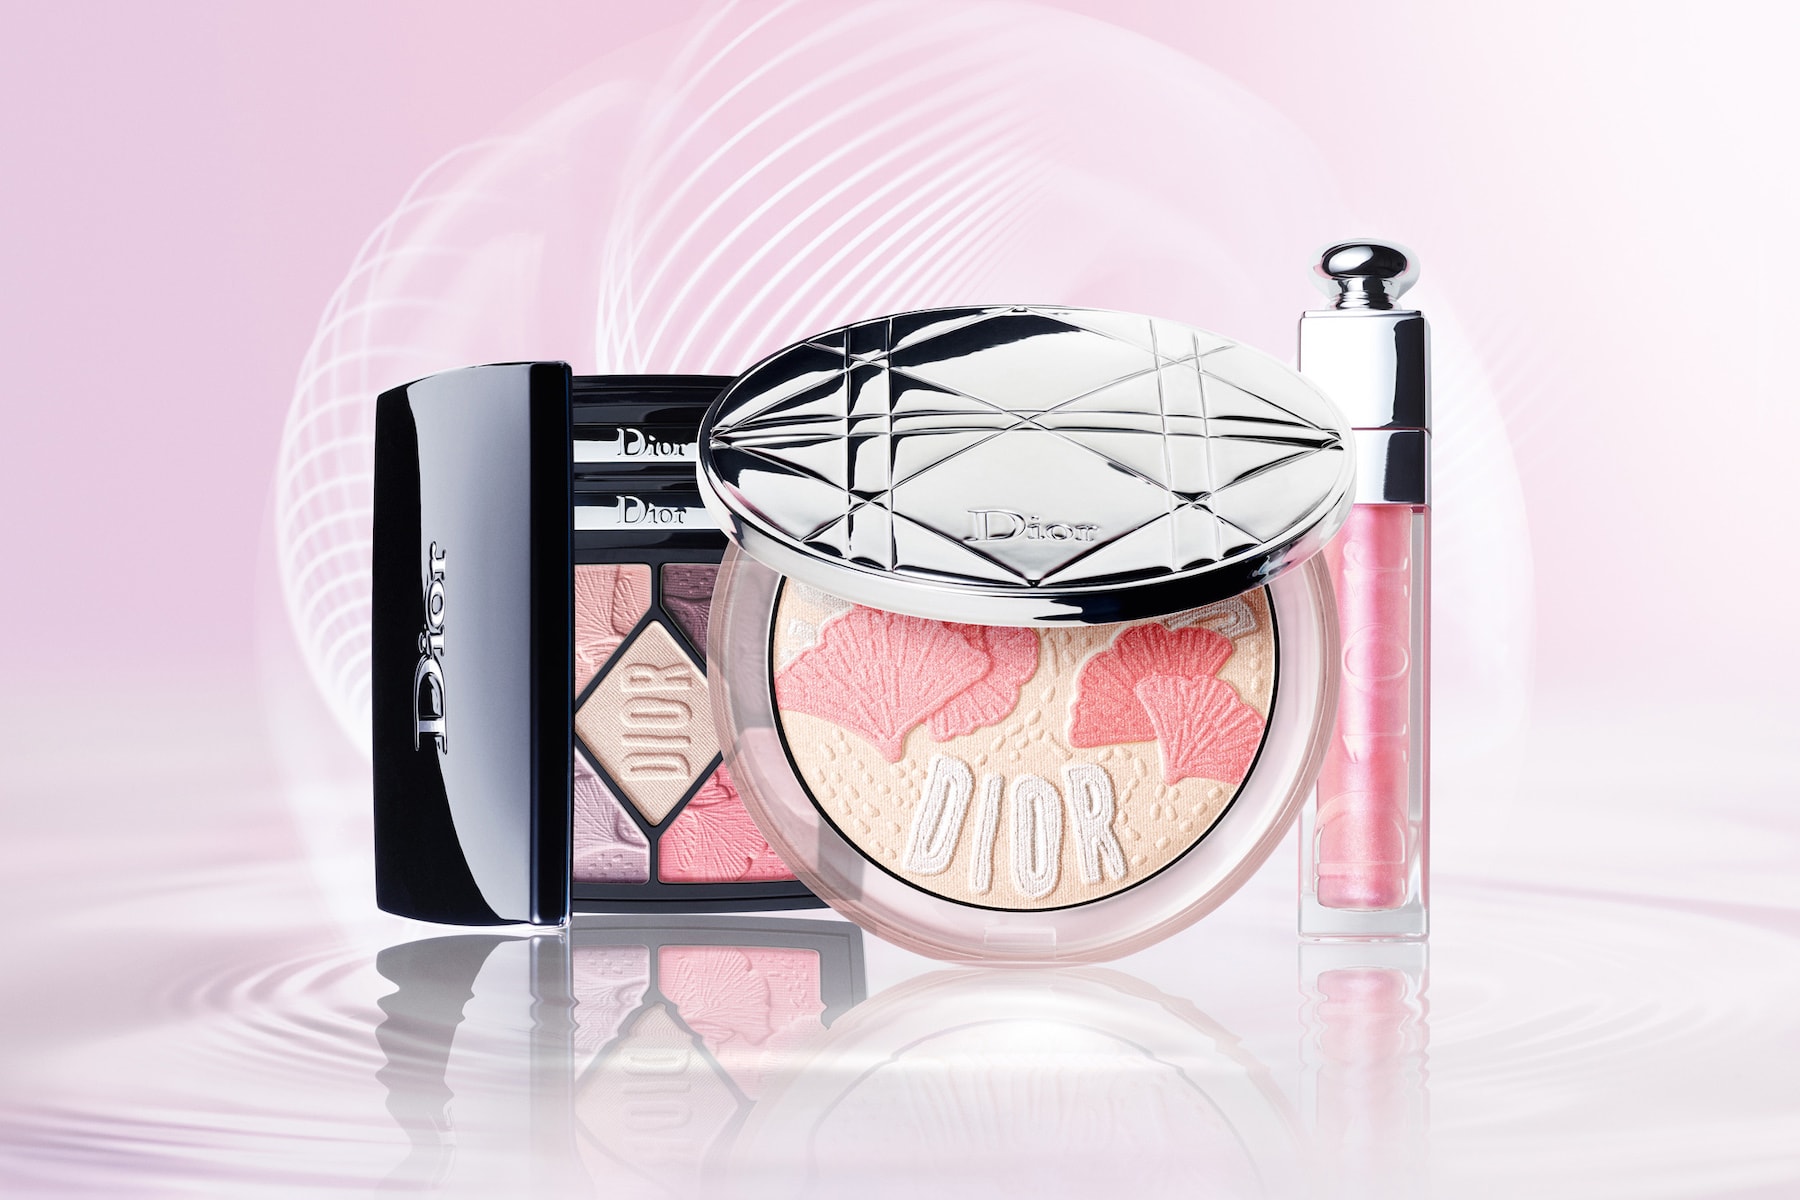 Dior Makeup Diorsnow Beauty Collection Lipgloss Eyeshadow Palette Blush Highlight 